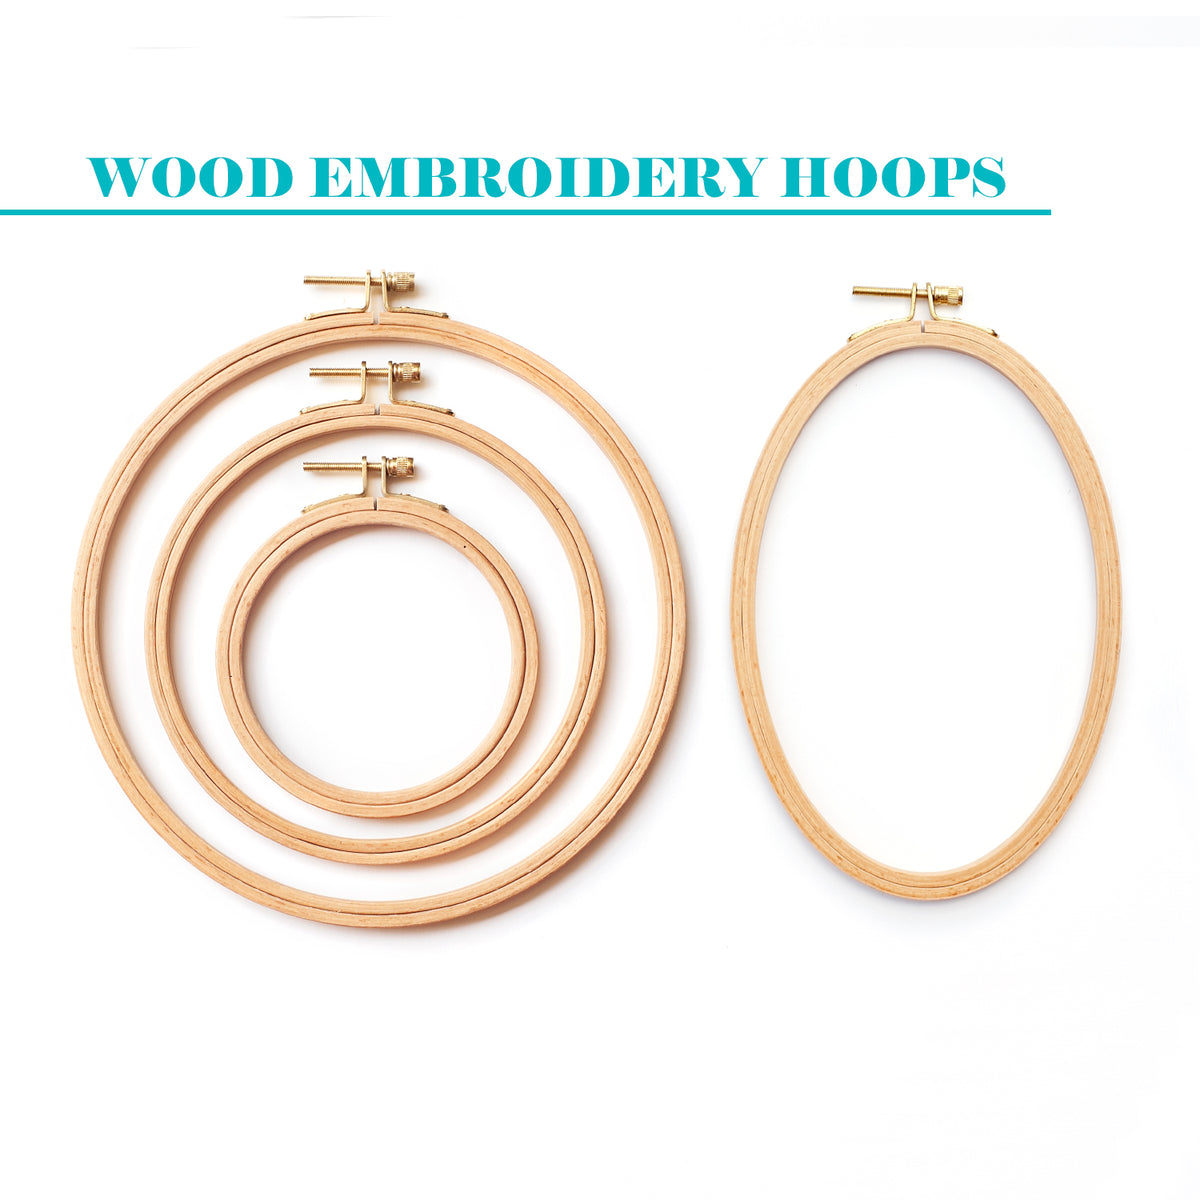 Beech Wood Embroidery Hoop, 2 Packs 6 Inch Cross Stitch Hoops, Splinters  Free Embroidery Frames for Art Craft Sewing and Decoration Hanging